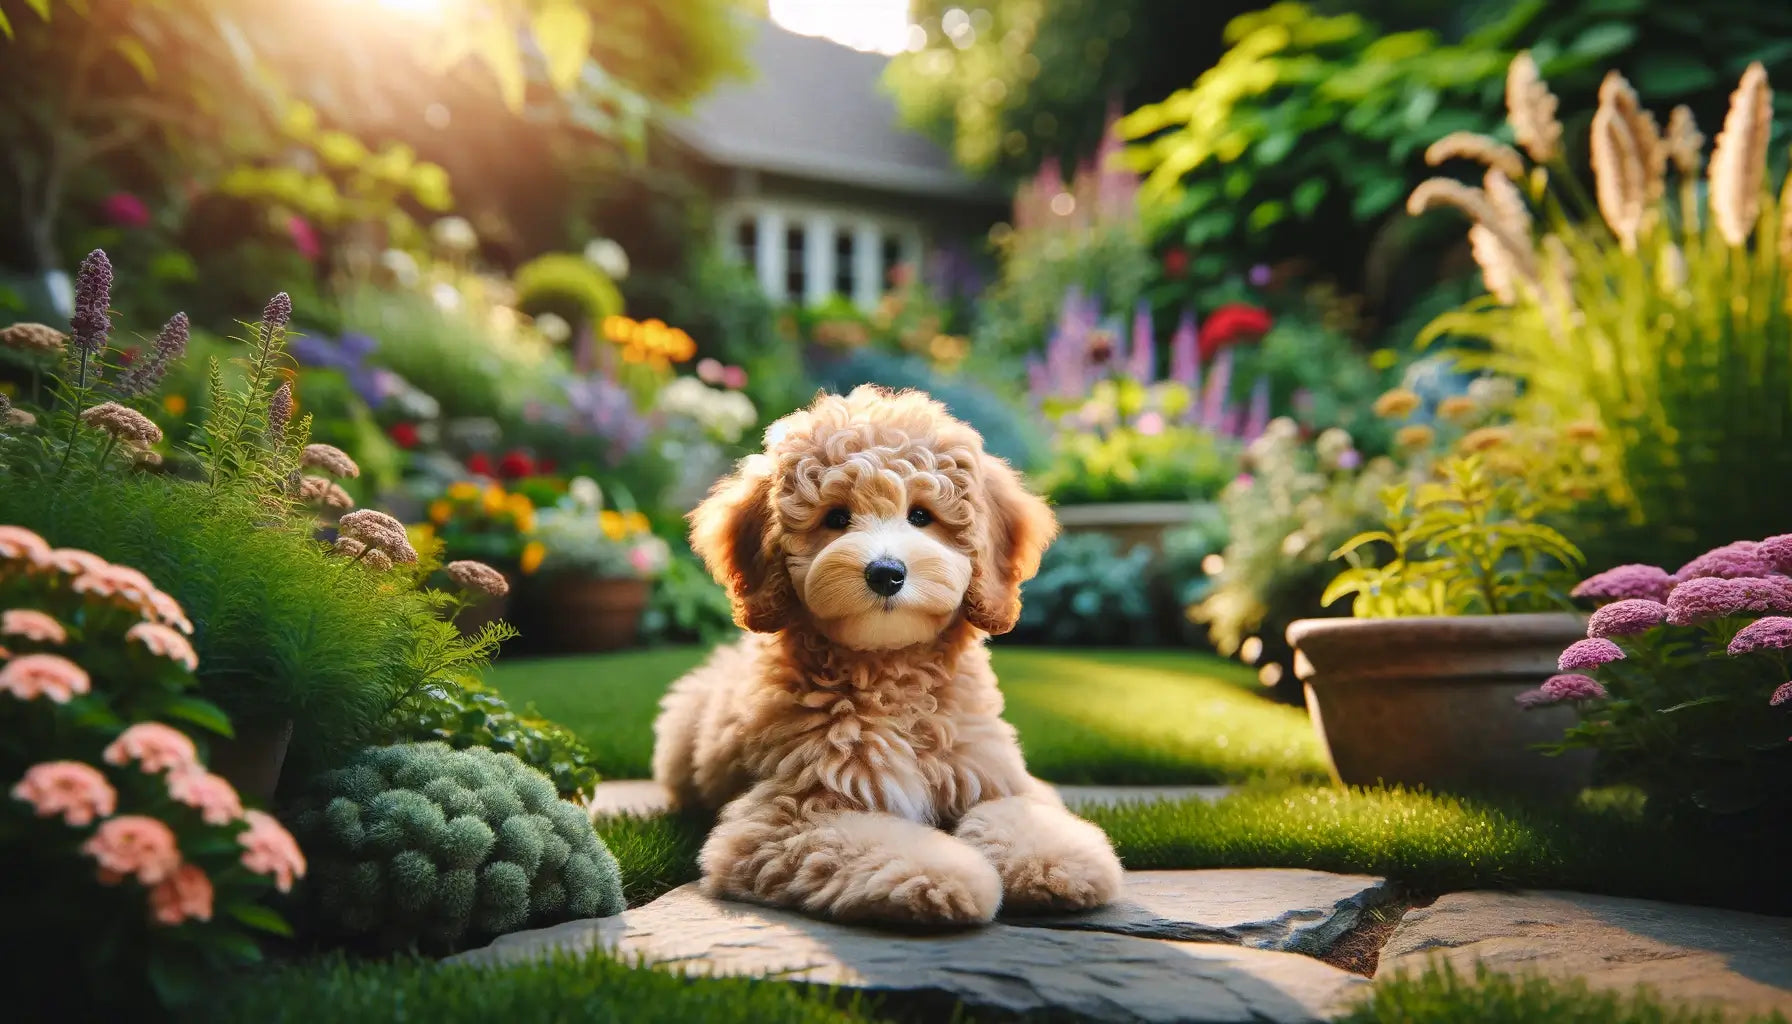 Teacup Goldendoodle is seen relaxing in a garden, its calm posture and petite size accentuating its ability to enjoy tranquil moments.